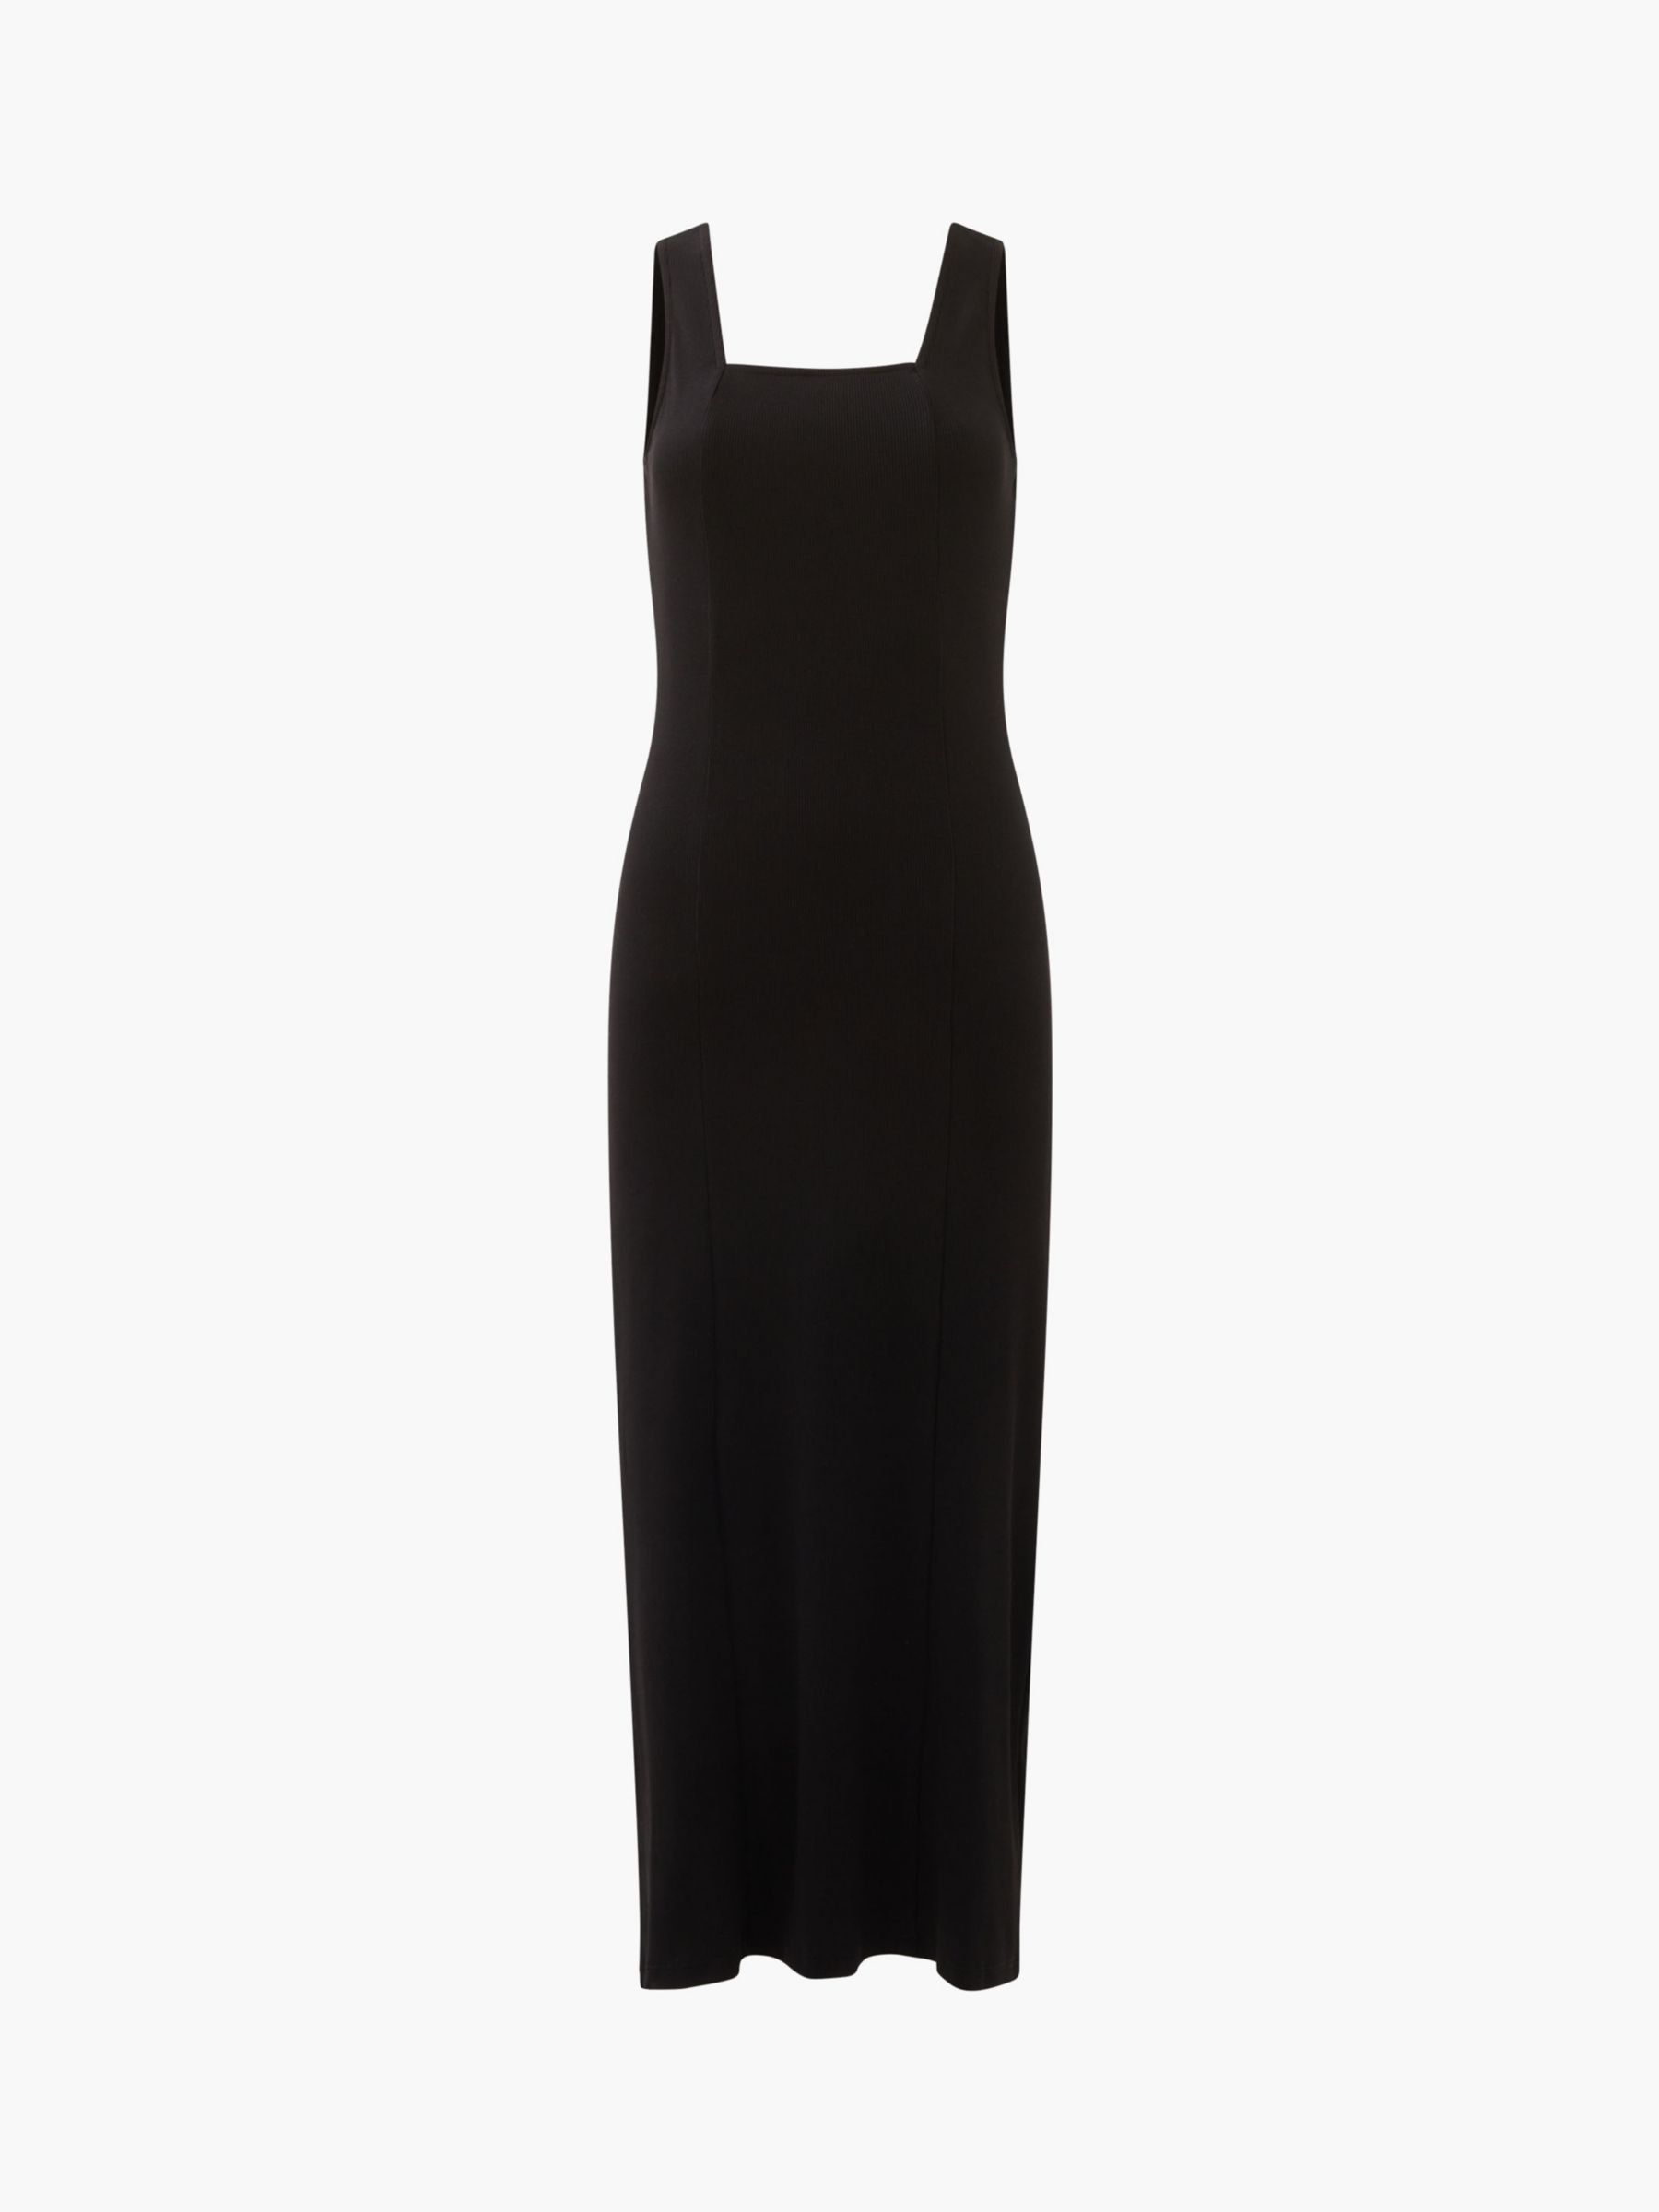 Buy French Connection Rassia Rib Square Neck Midi Dress Online at johnlewis.com